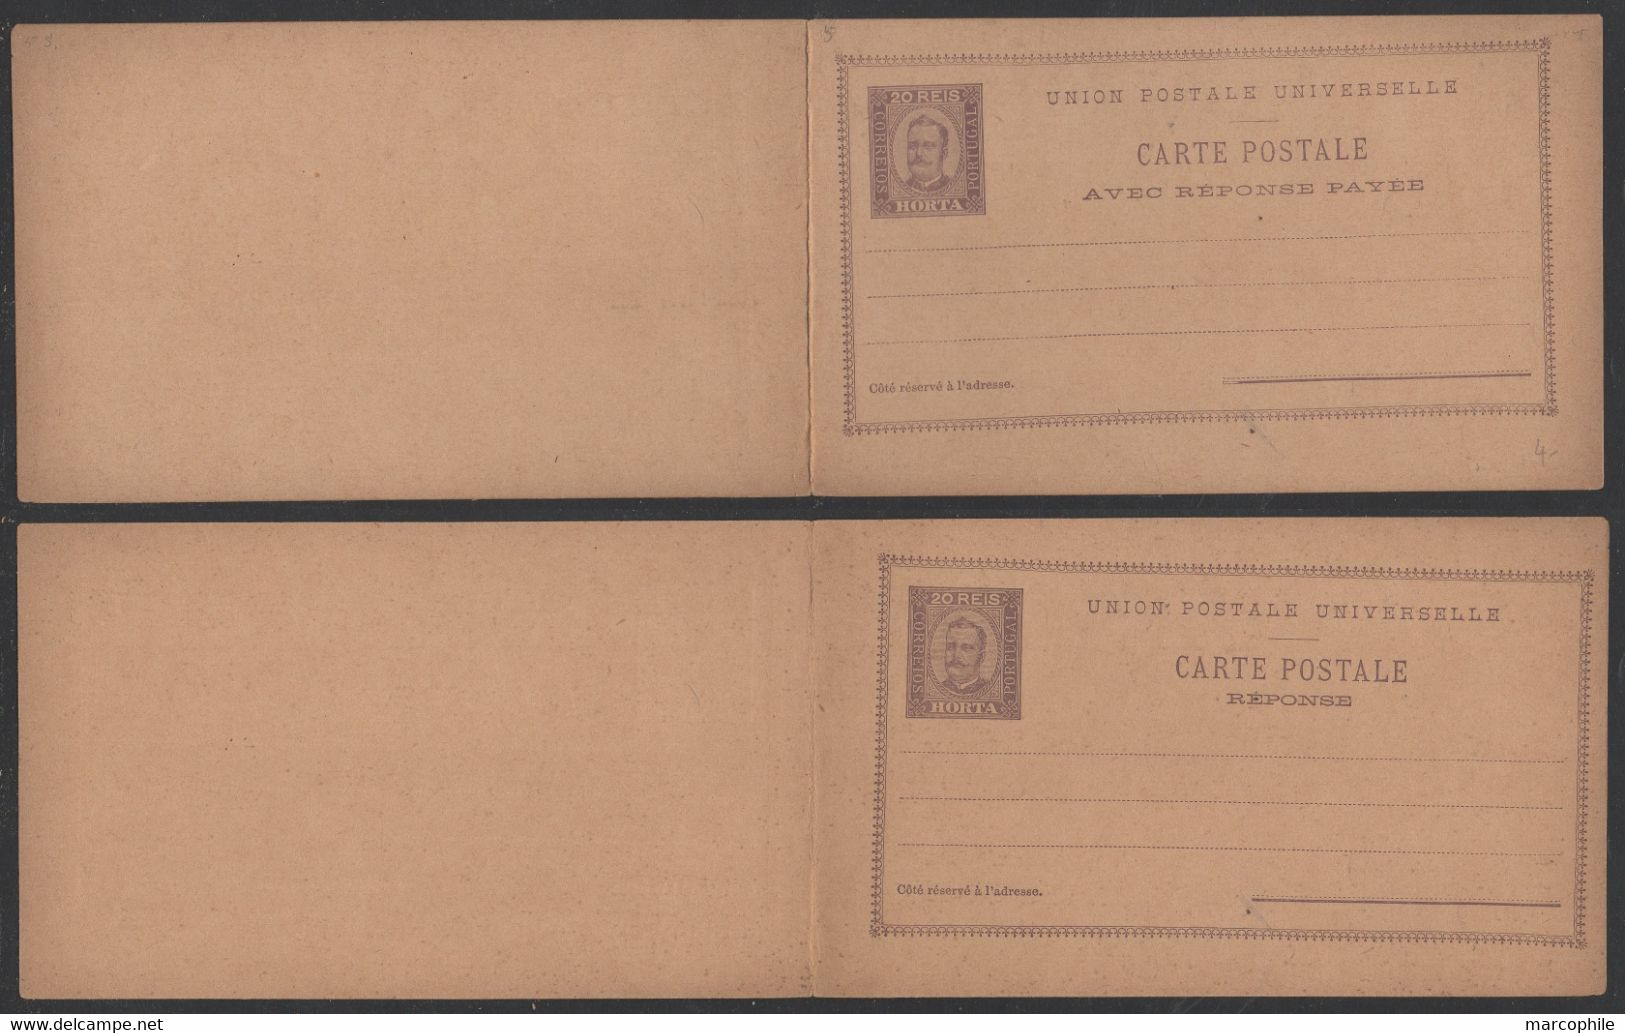 HORTA - AZORES - PORTUGAL / ENTIER POSTAL DOUBLE - REPONSE PAYEE 20/20 R. LILAS (ref 8171c) - Horta